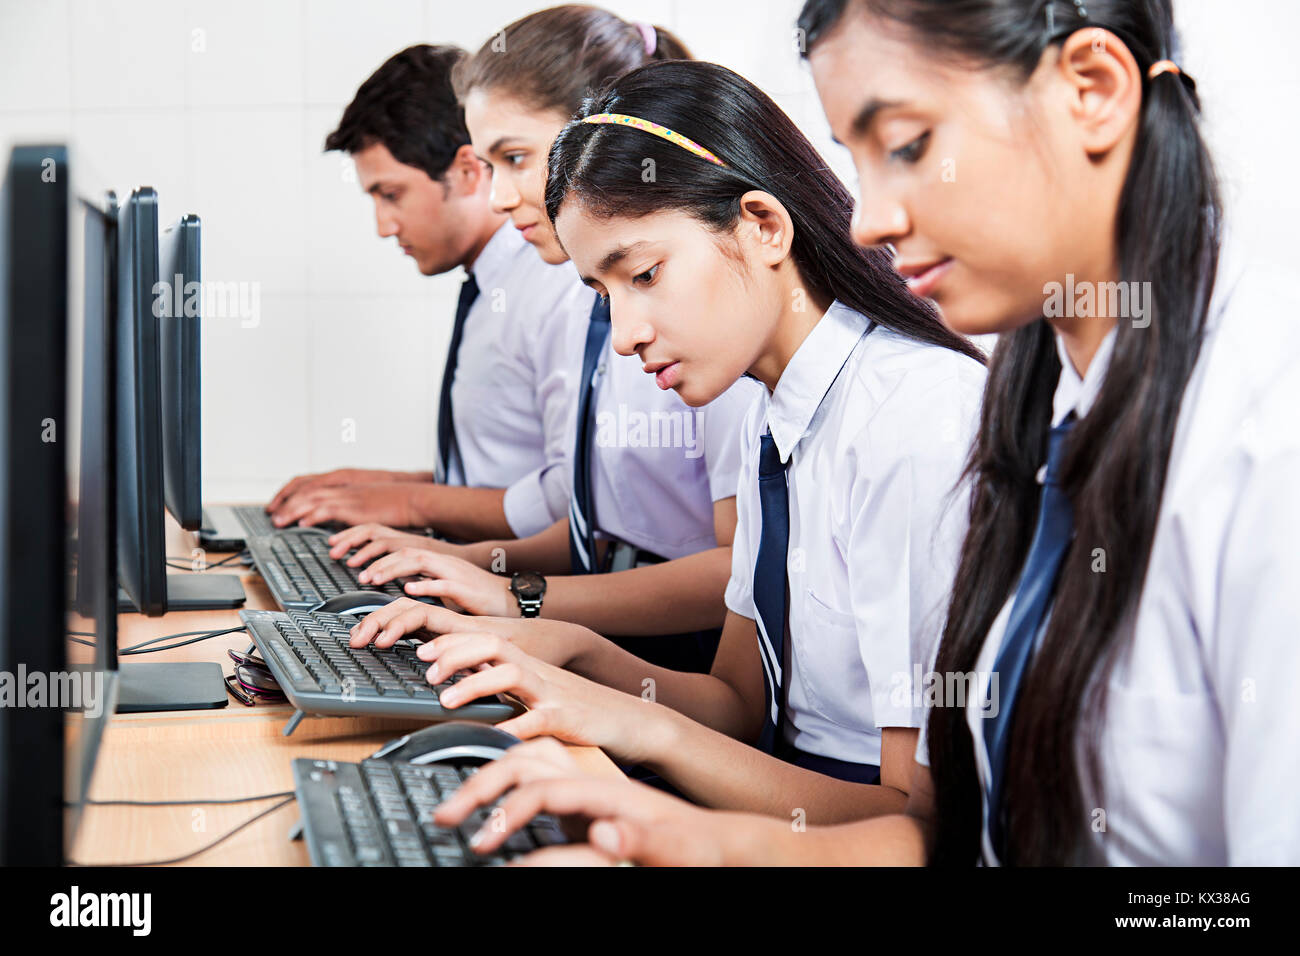 Indian High School Students Using Computer Study Education Learning Classroom Stock Photo